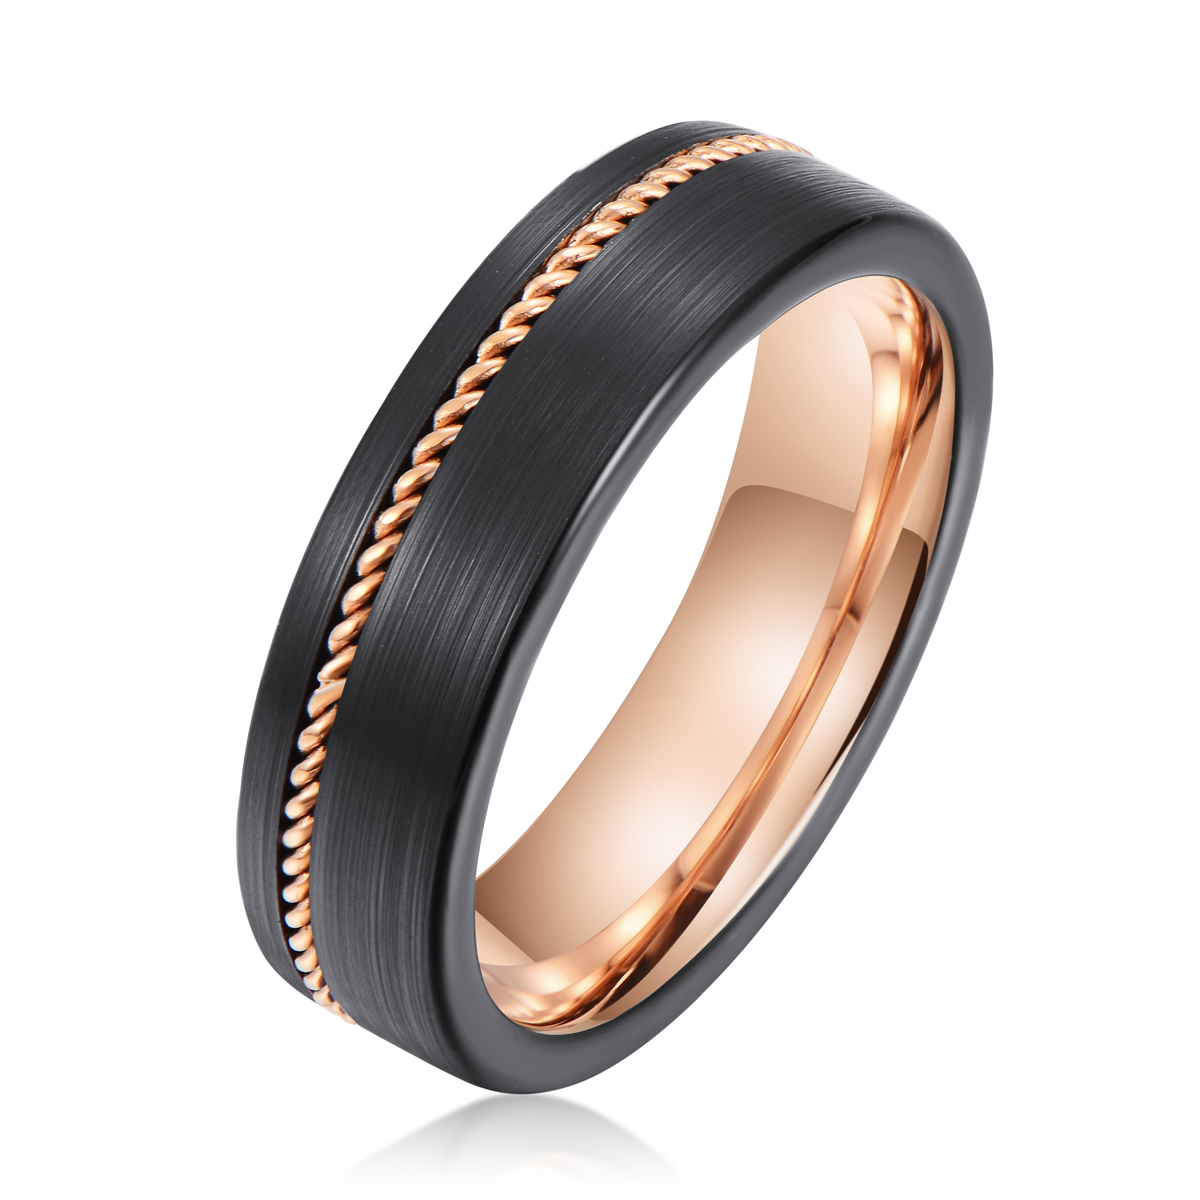 Hot sale 6mm Tungsten carbide steel Ring Women’s Comfort fit Wedding Band rings fine jewelry women men Featured Image